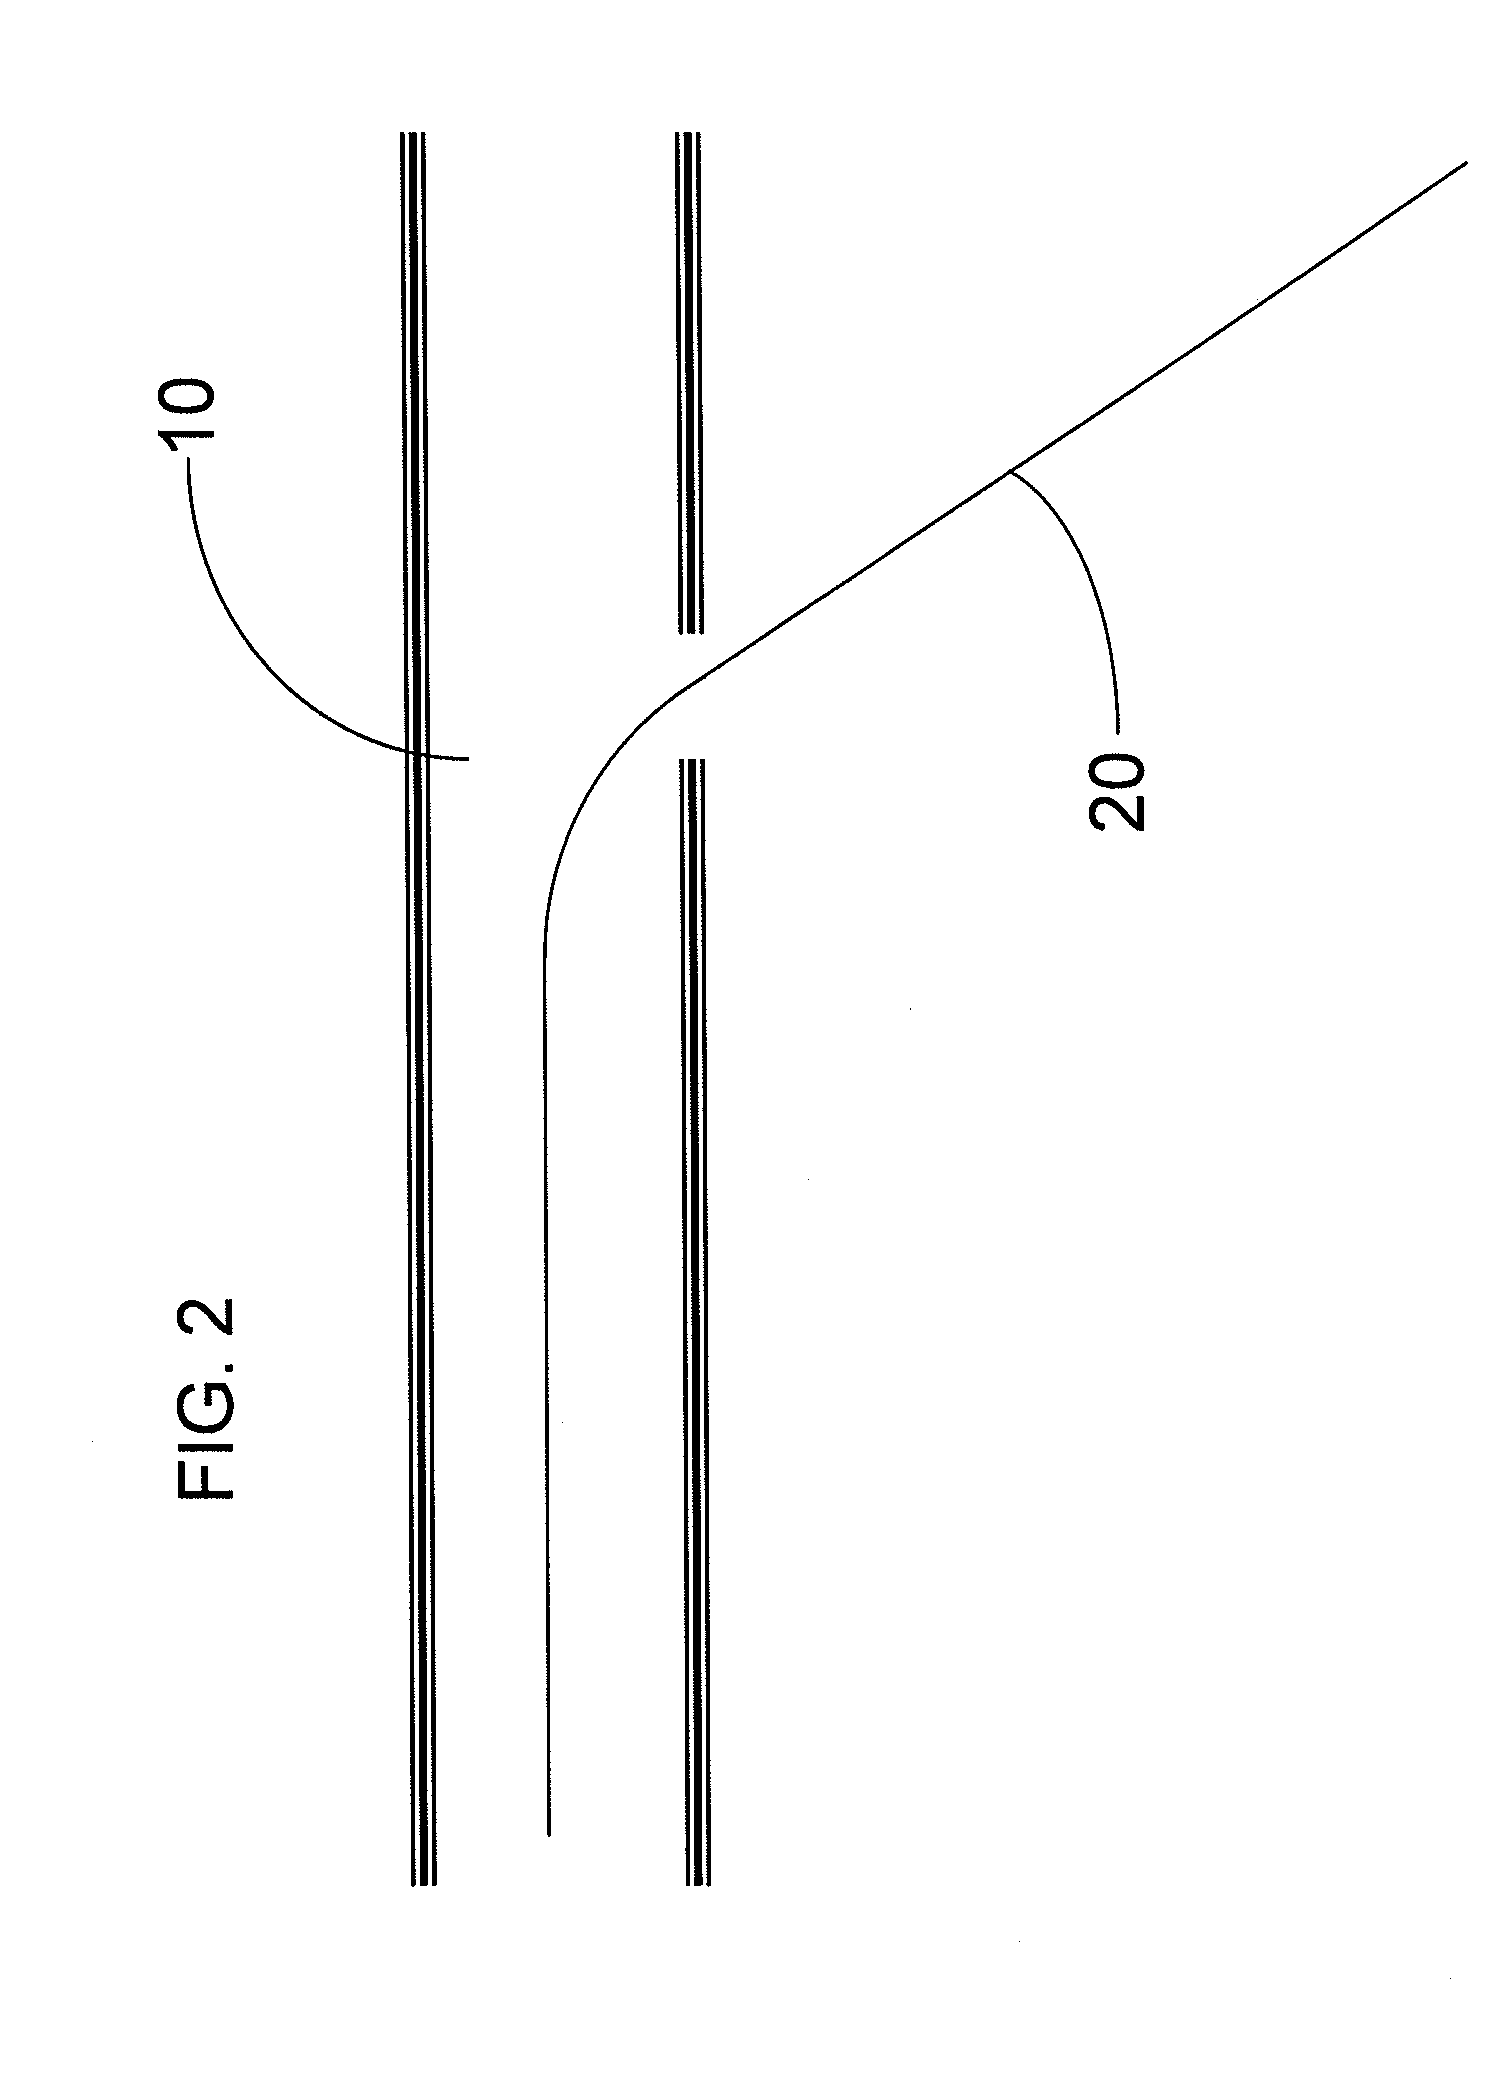 Apparatus and Associated Method for Facilitating Implantation of Leads of a Cardiac Pacemaker